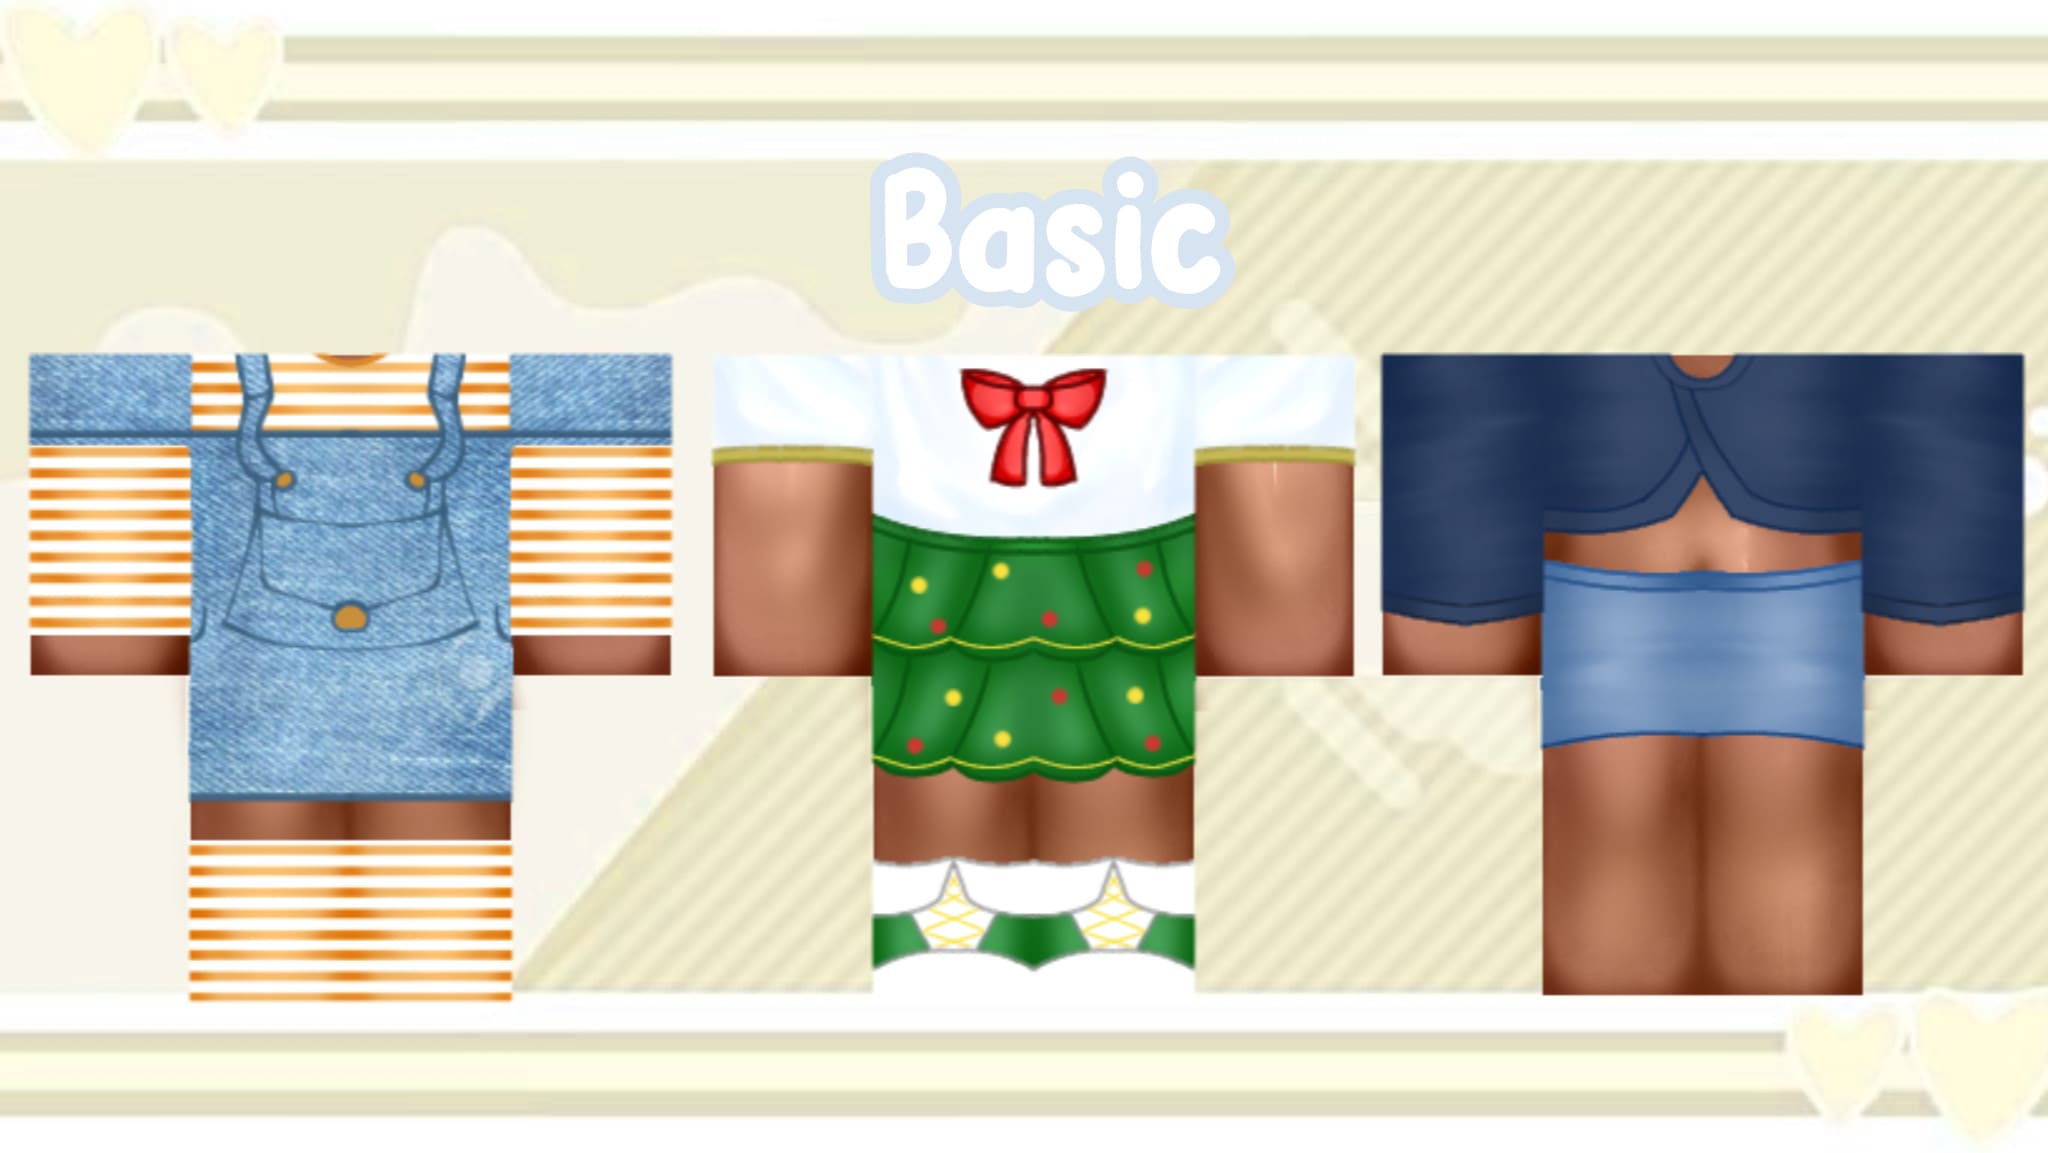 Make custom high quality roblox clothing for you by Vegacaad